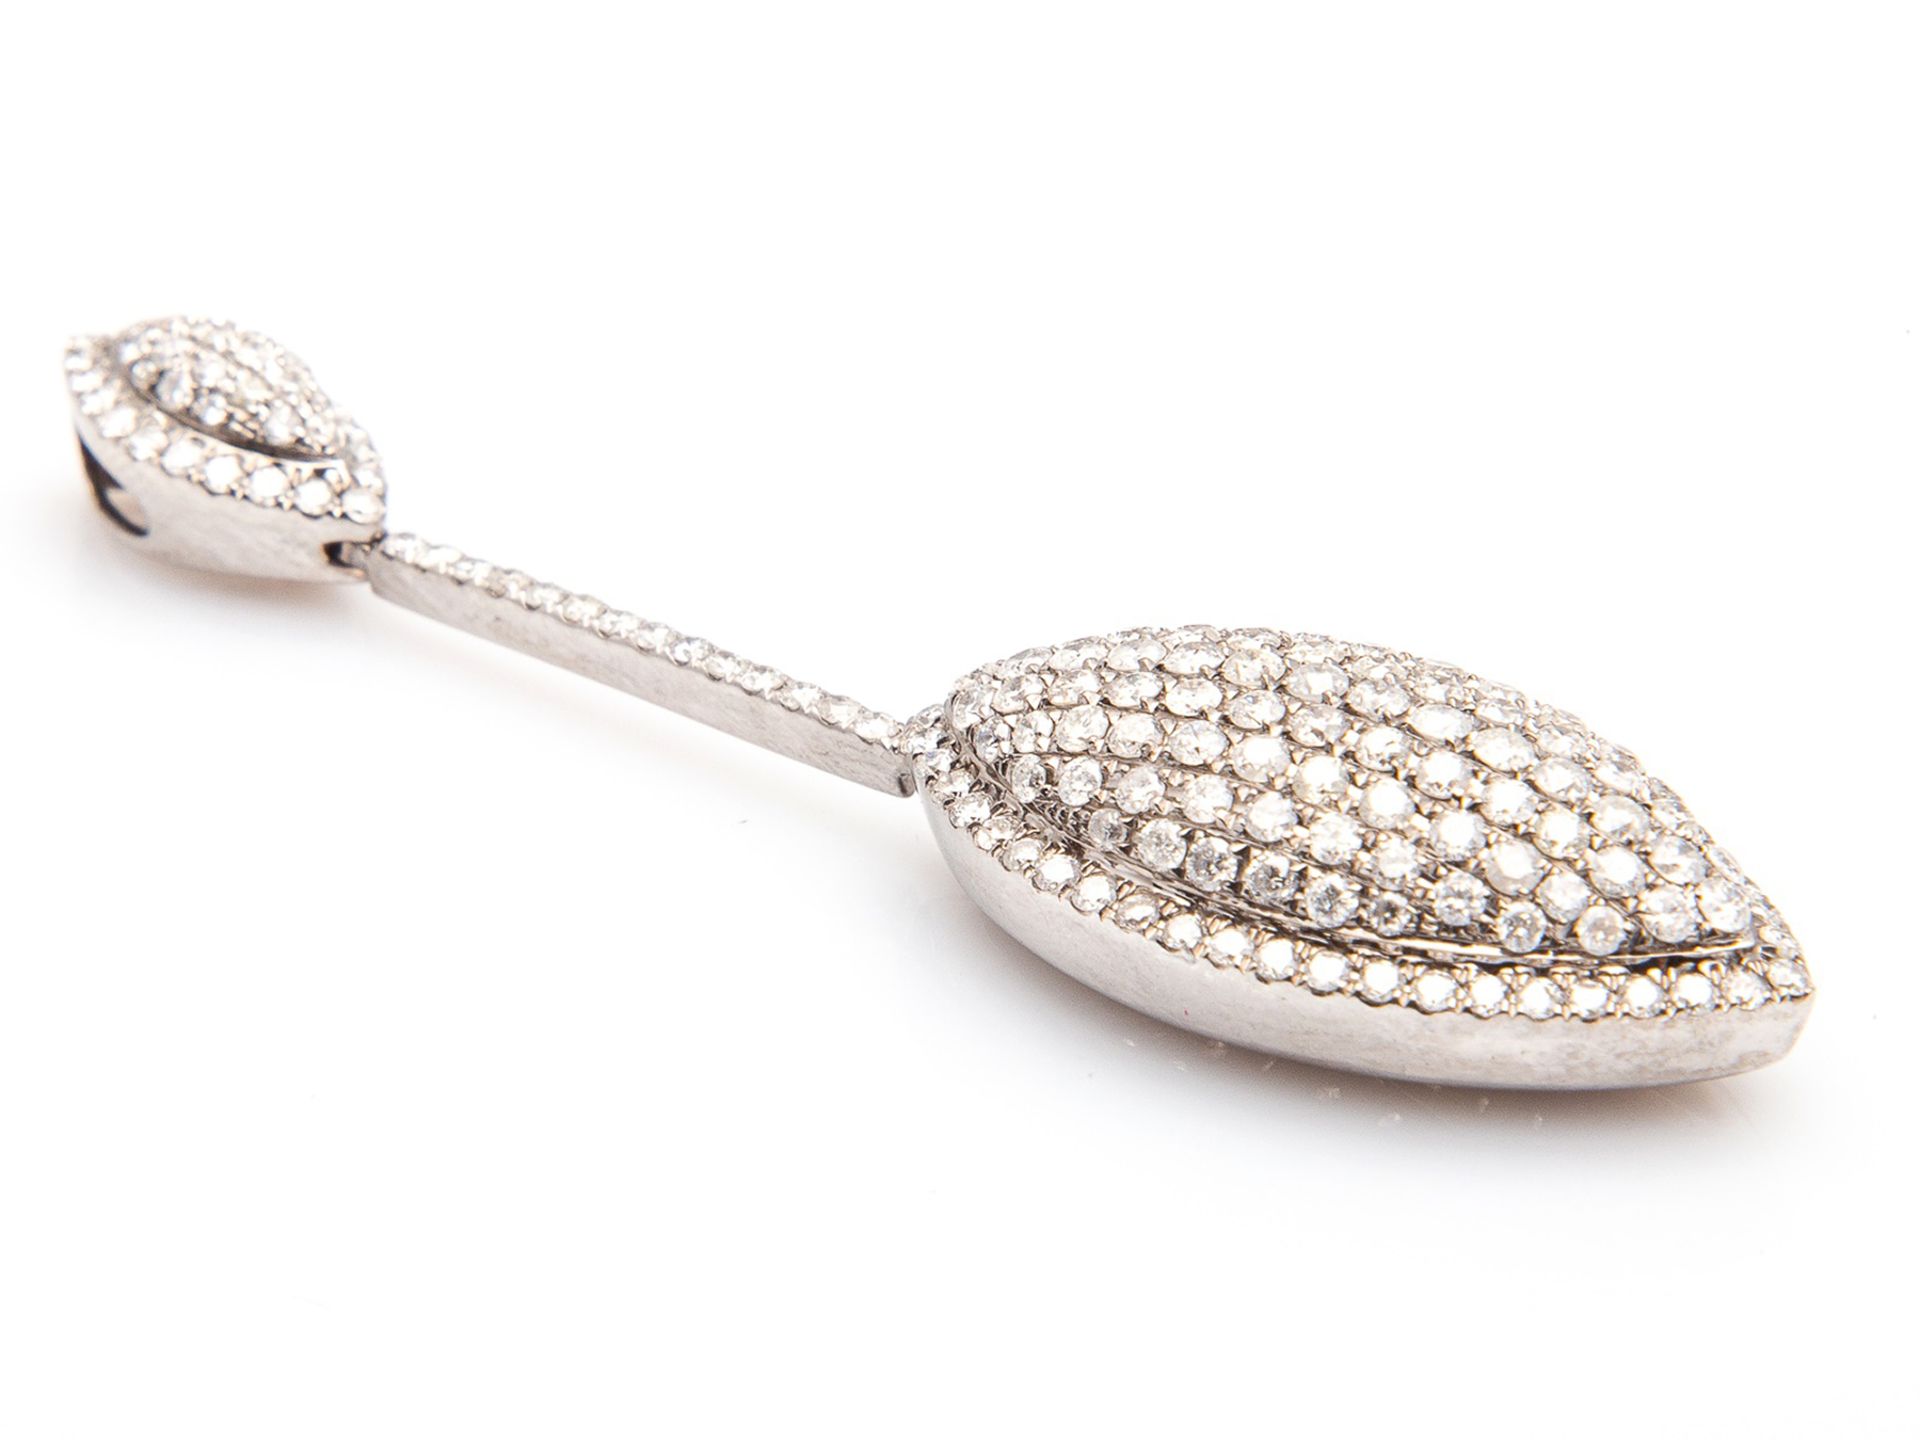 Distinguished pendant for Lady in 18k white gold with 3 ct of brilliant cut diamonds in total - Image 5 of 9